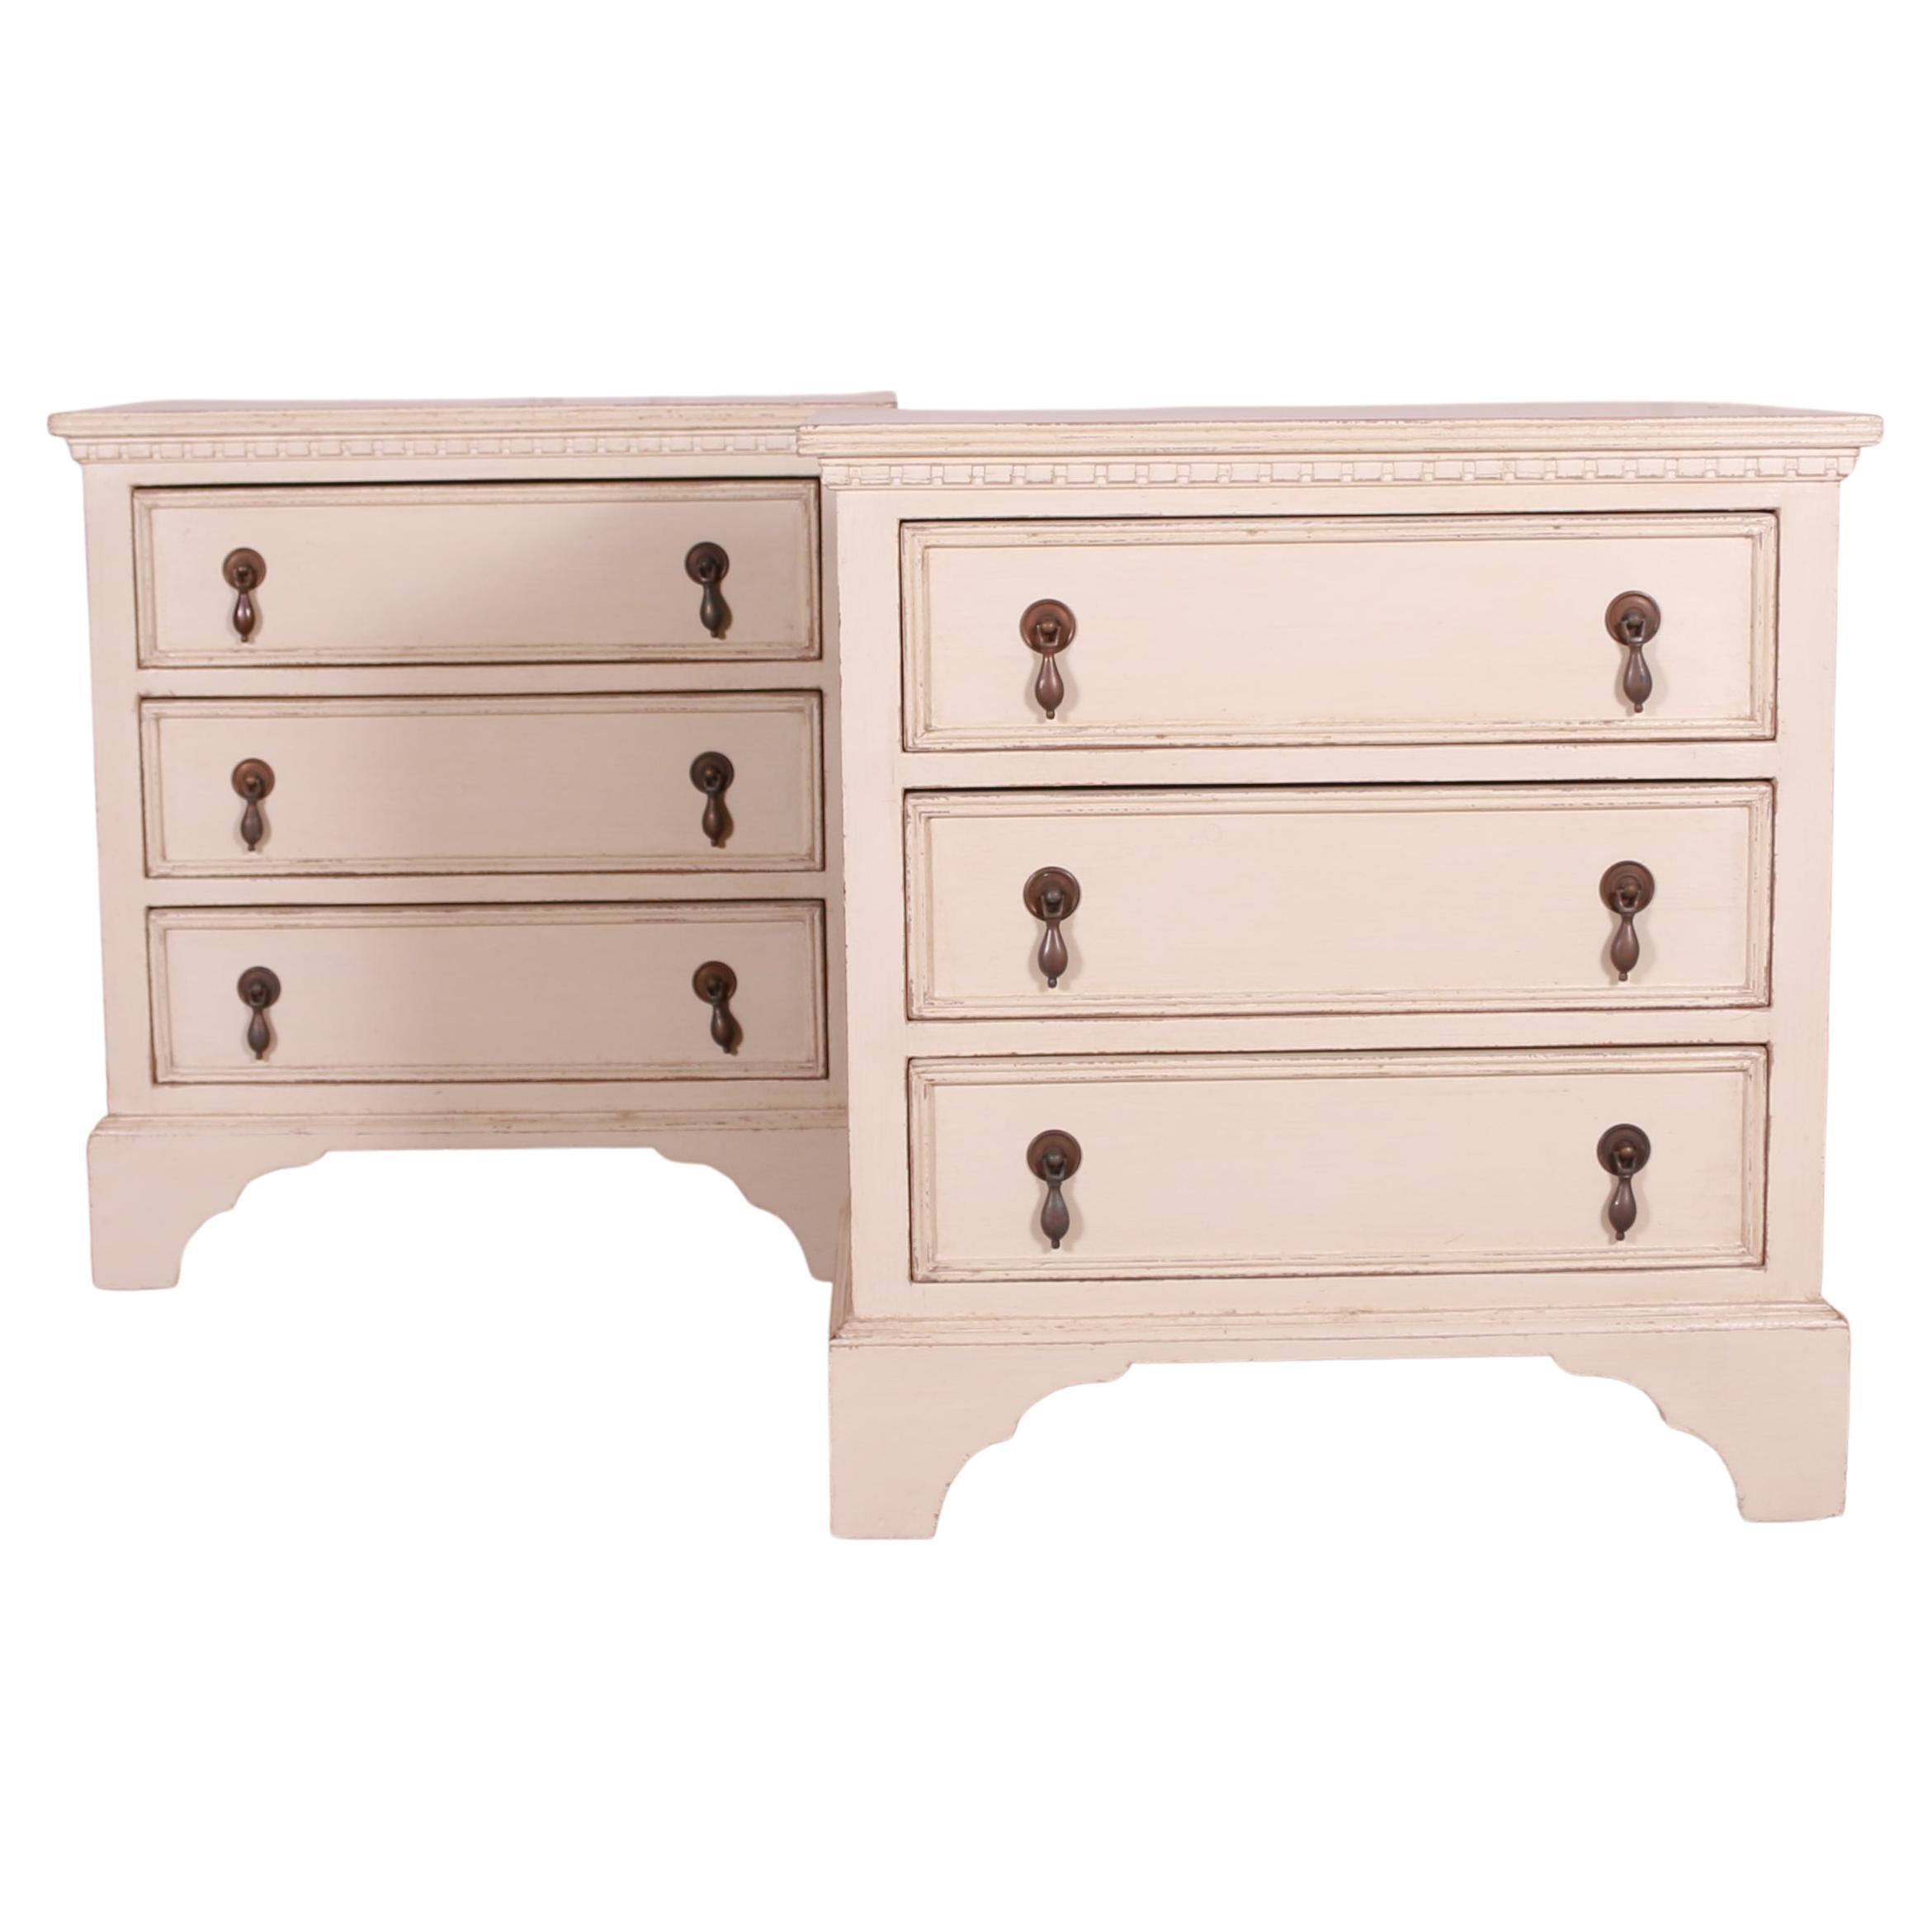 Pair of Painted Bedside Chest of Drawers